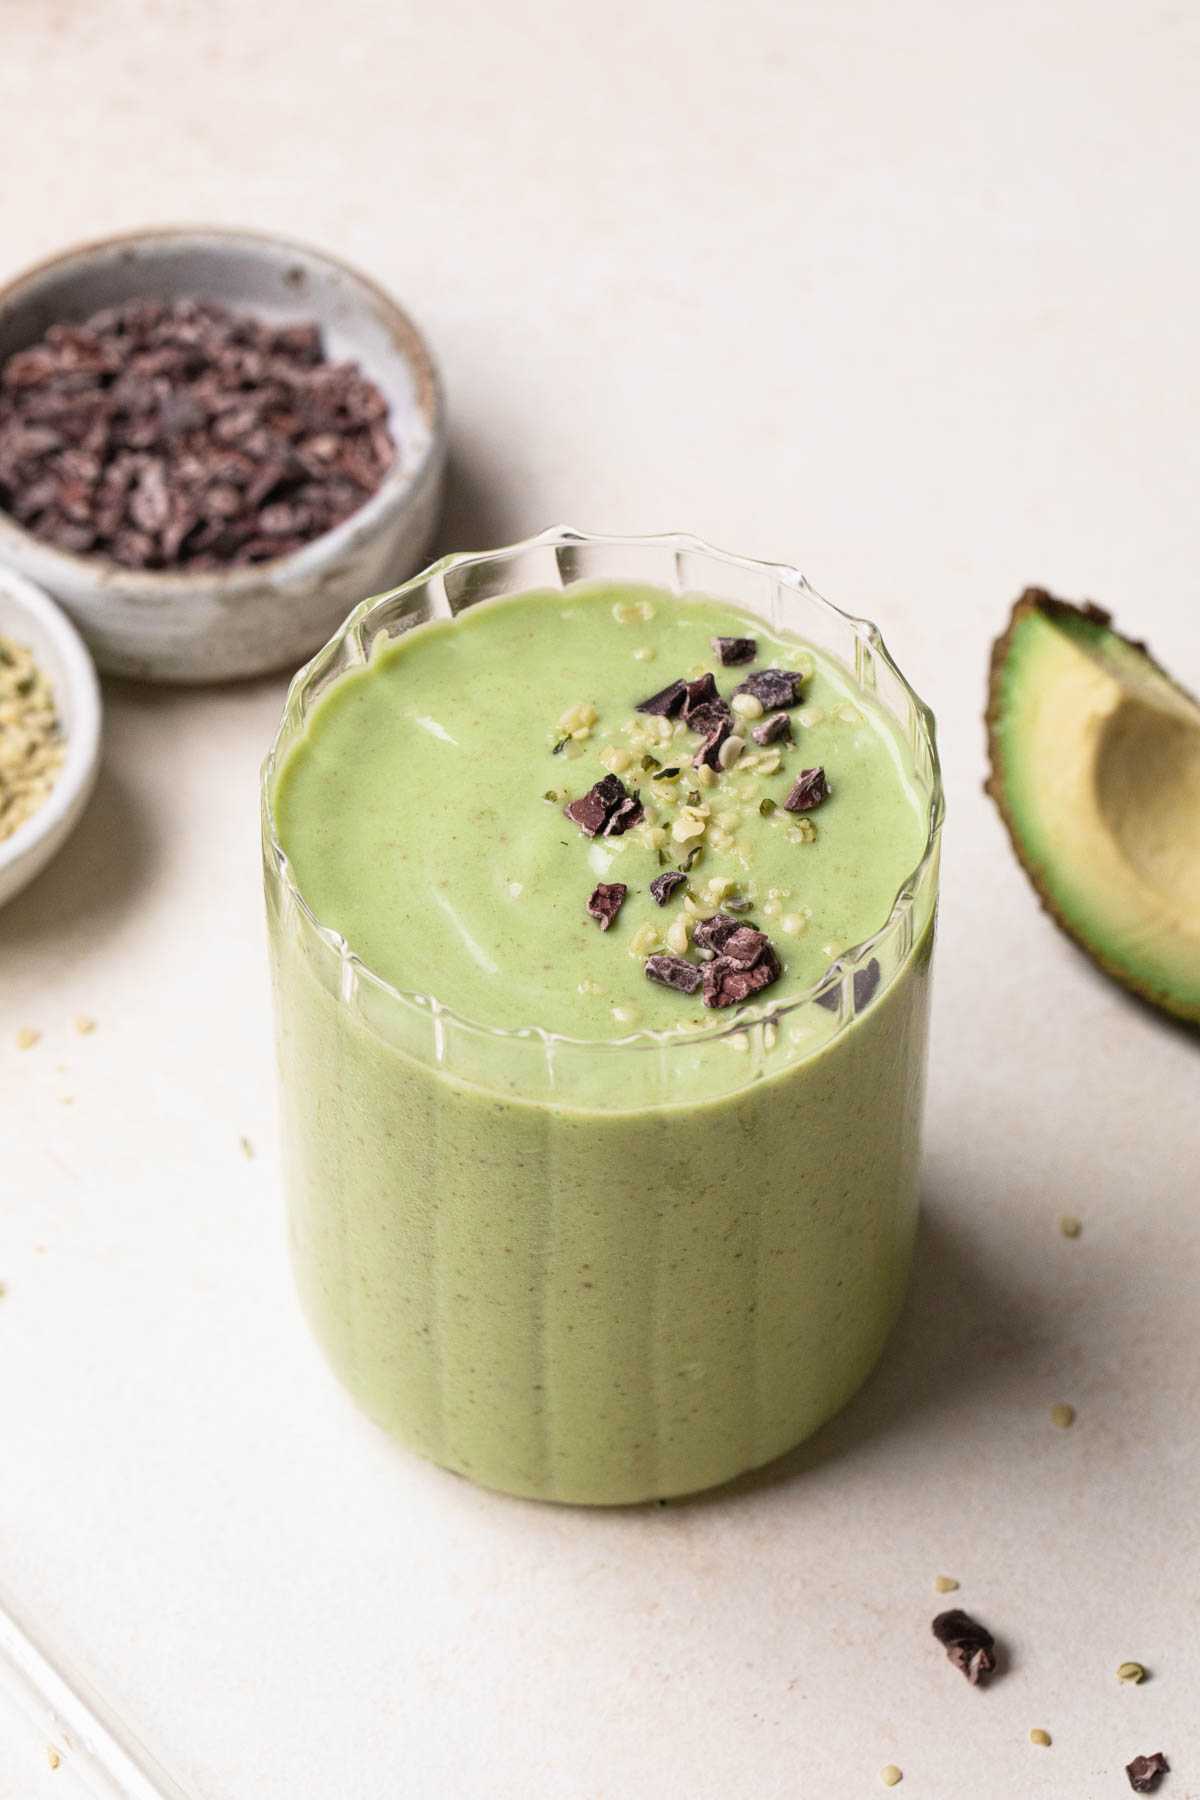 Image of an avocado banana green smoothie in a clear glass with cacao nibs